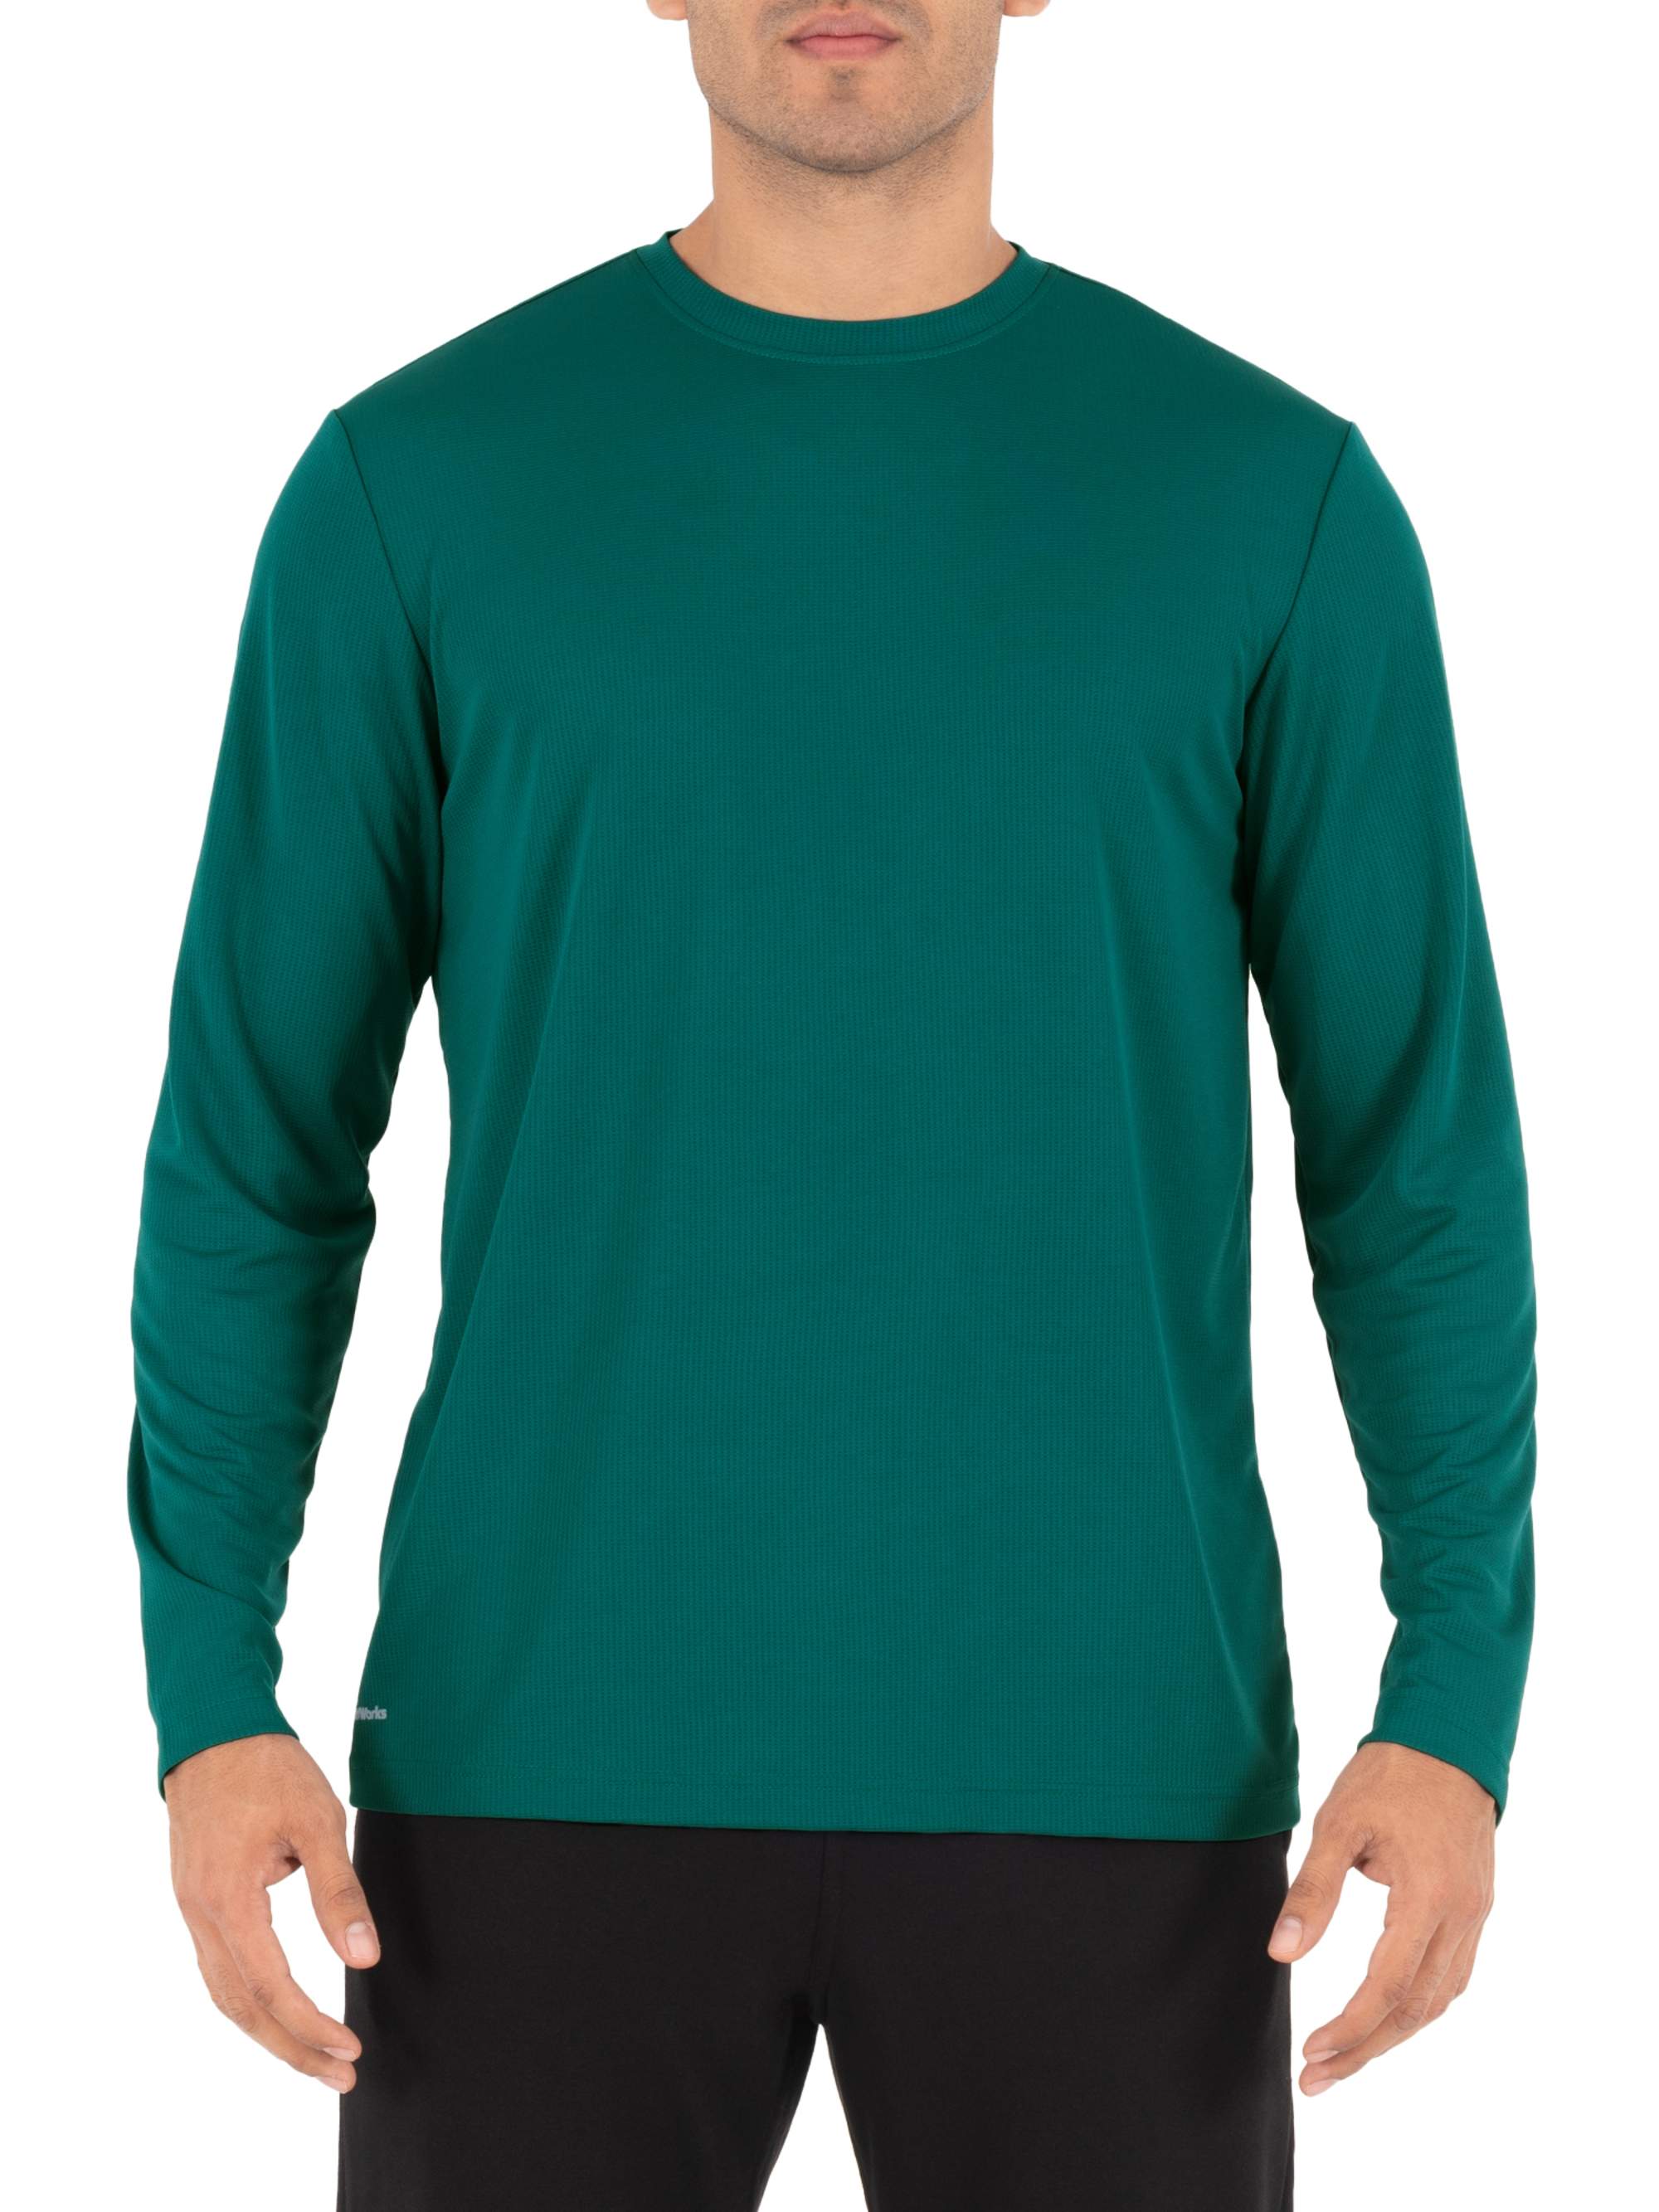 Athletic Works Men's and Big Men's Active Quick Dry Performance Long Sleeve T-Shirt, up to Size 5XL - image 1 of 7